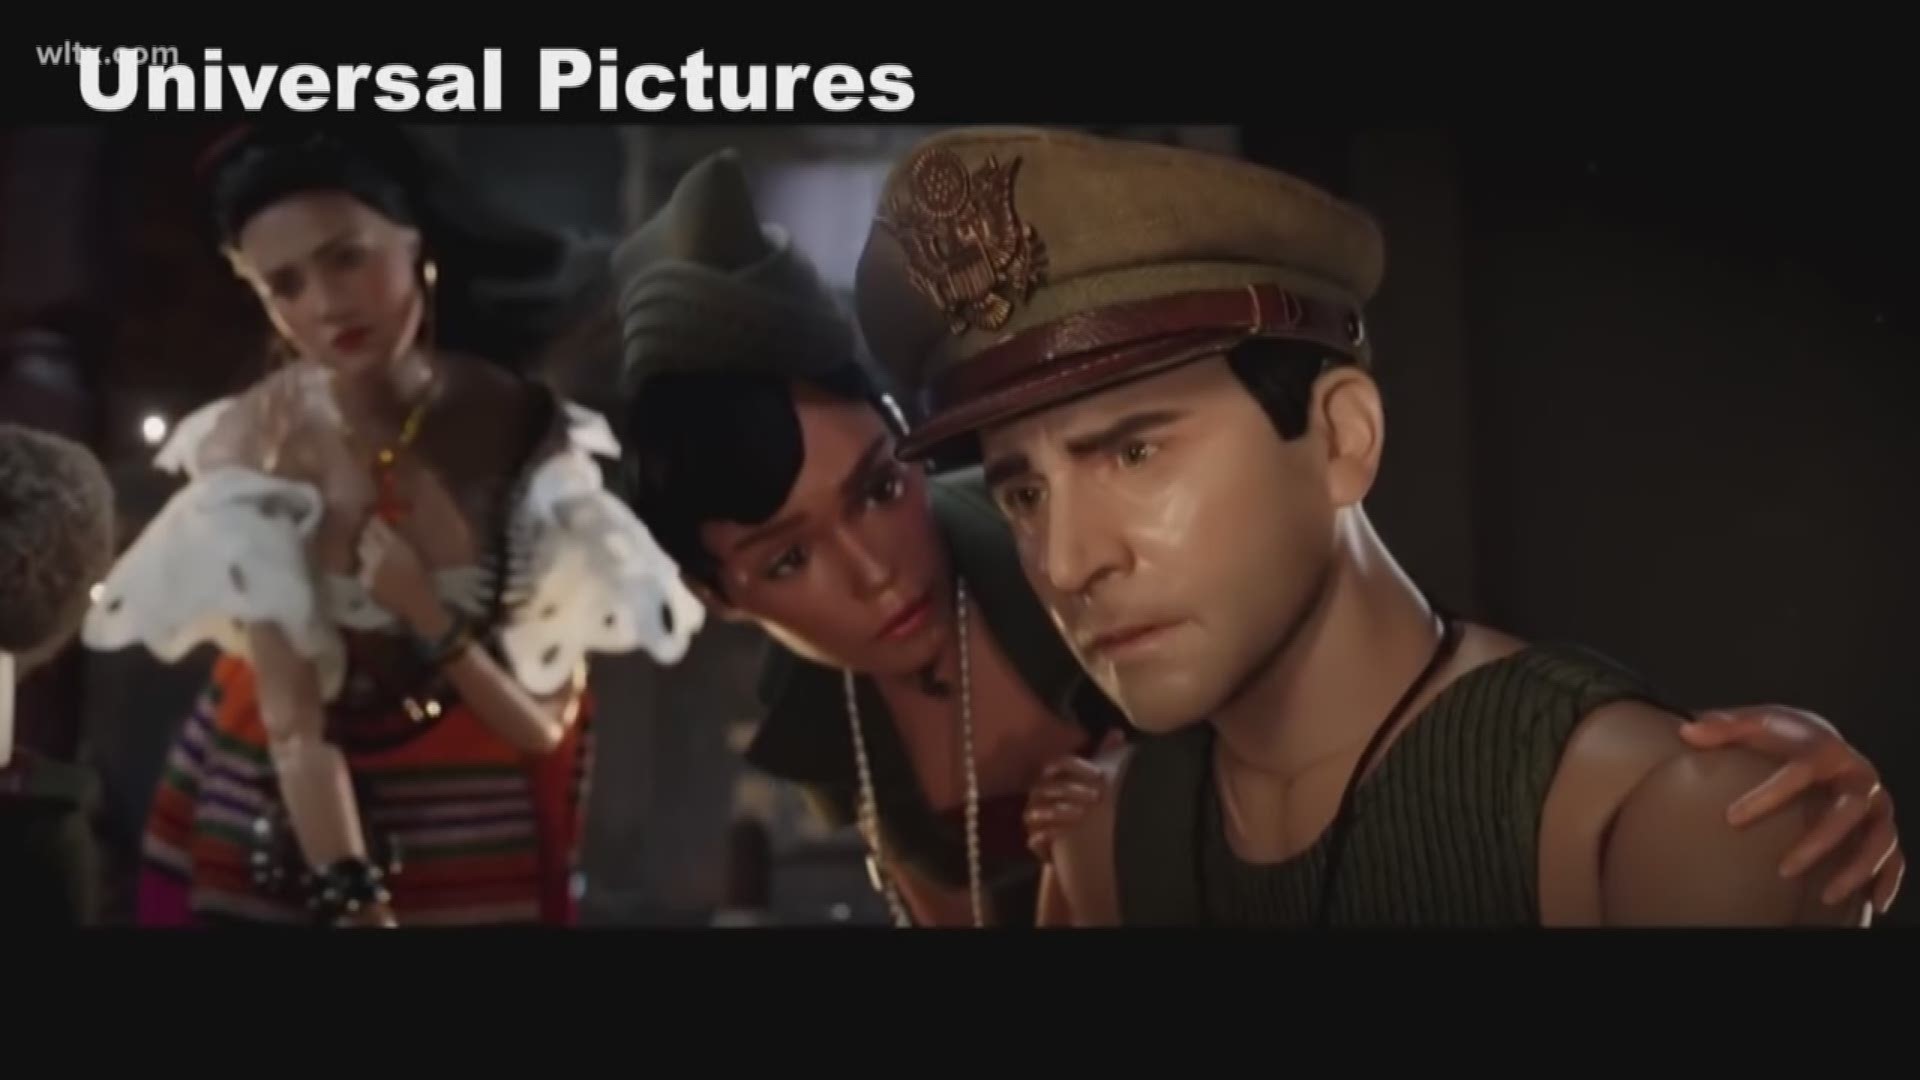 The miniature world of Marwen brings back timeless images of WWII.  It also brings back traumatic memories for its creator.  But will it bring appreciation from moviegoers?